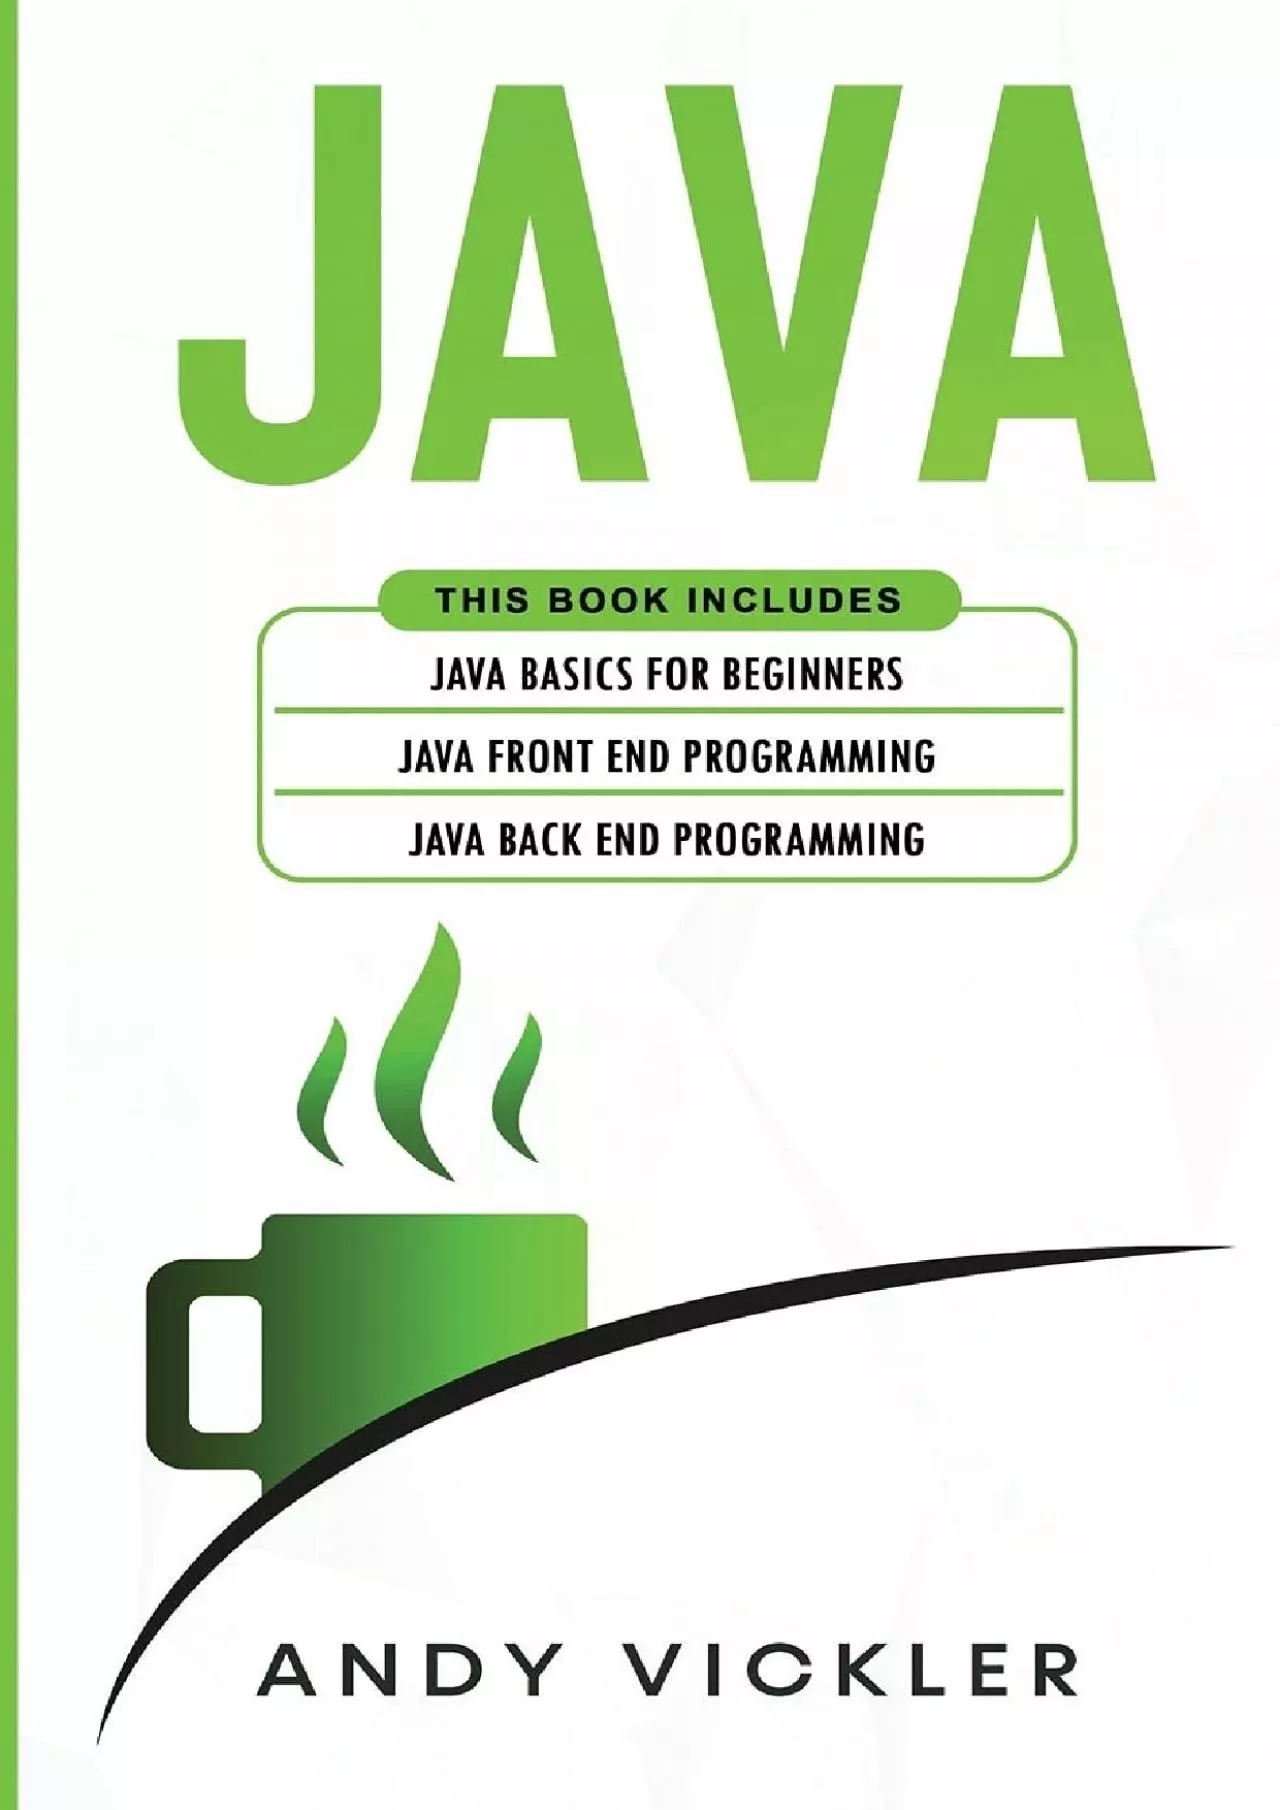 [FREE]-Java: This book includes: Java Basics for Beginners + Java Front End Programming